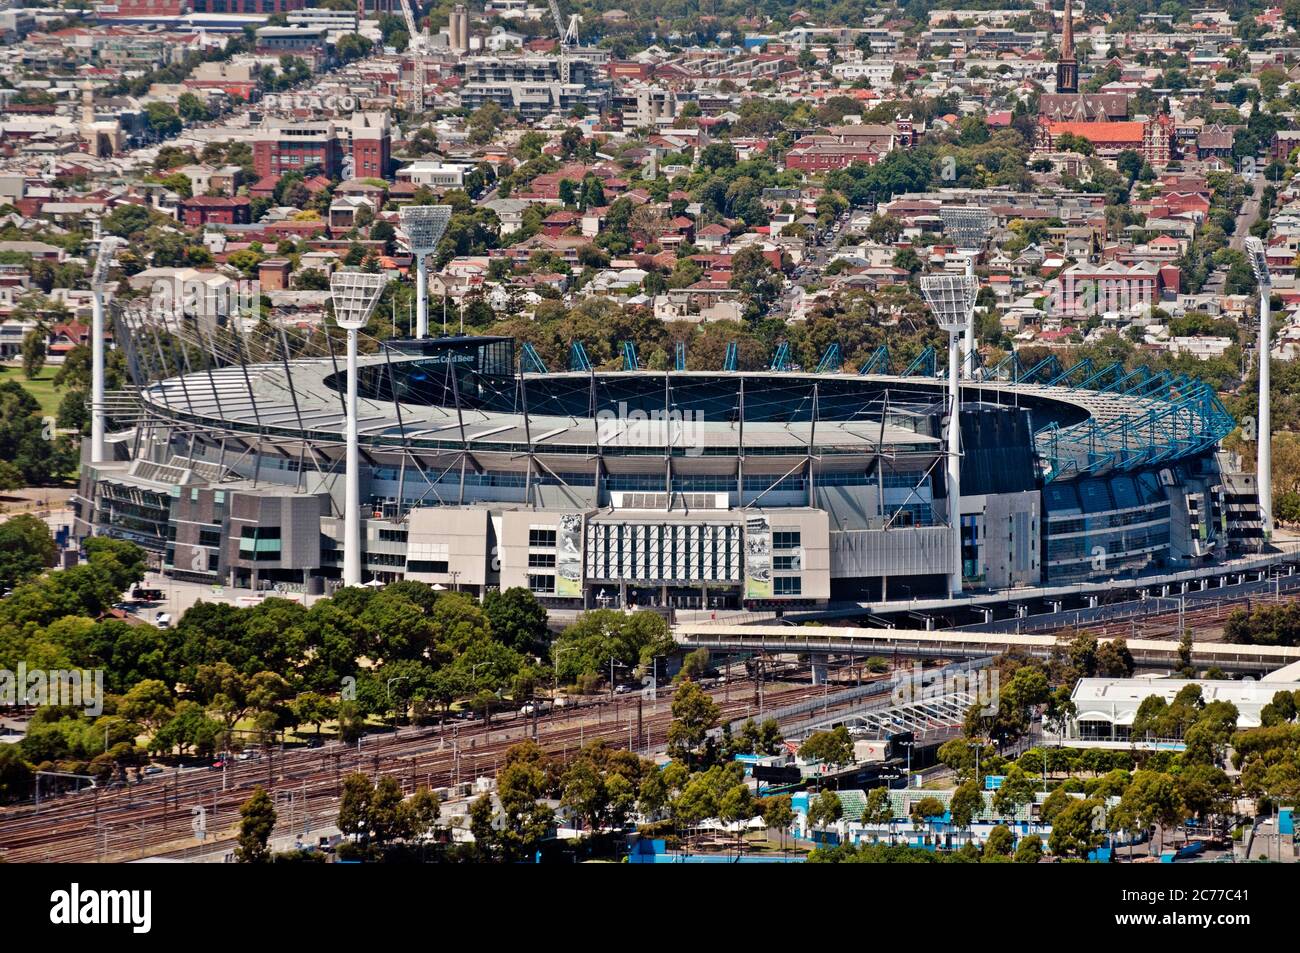 Aerial view of the Melbourne Cricket Ground (MCG), venue for many Australian Rules football matches including the annual Grand Final. Stock Photo